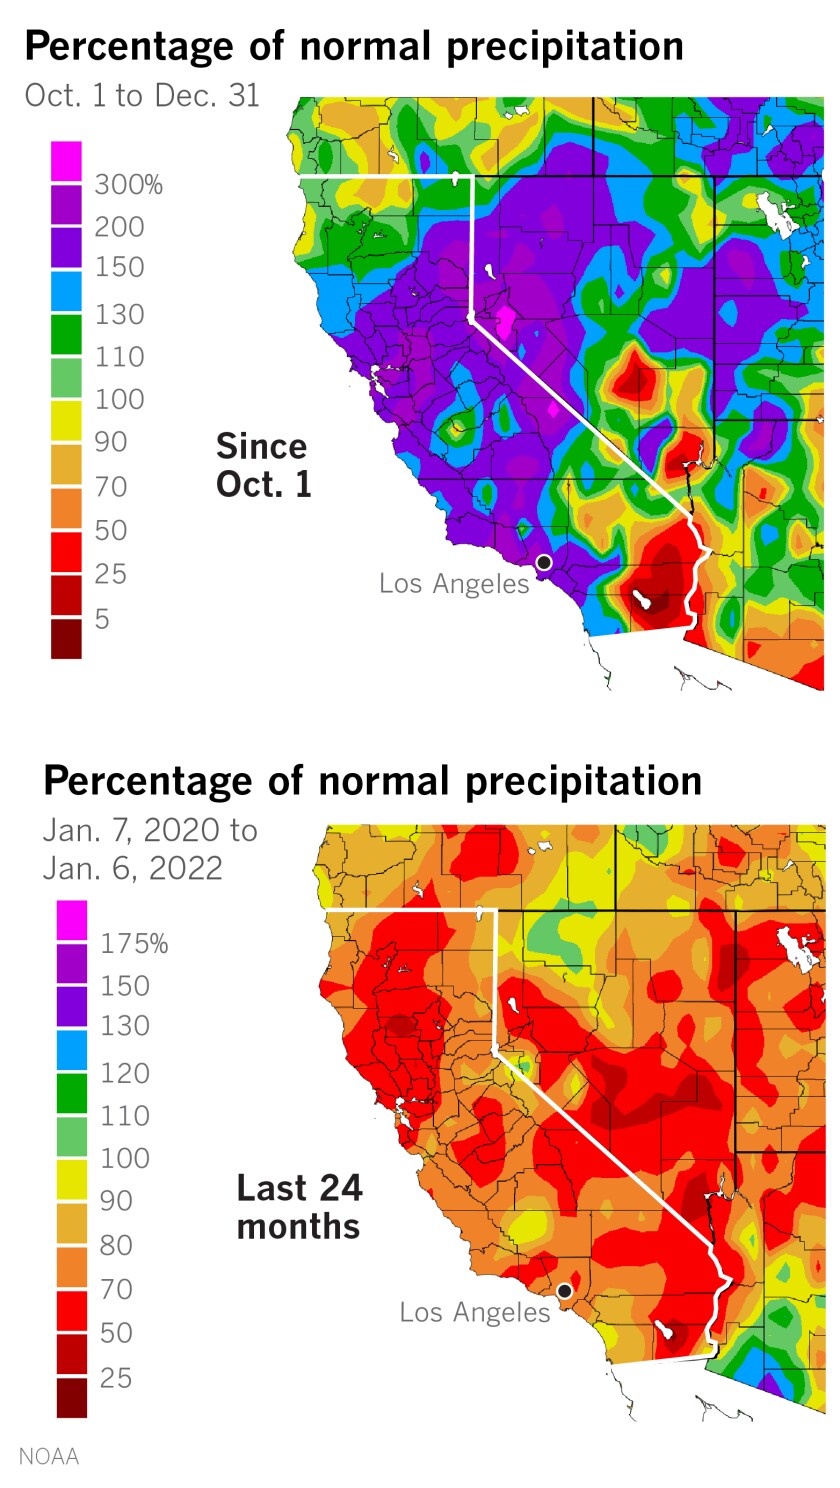 Maps show plentiful rainfall in California since Oct. 1, but deficits over the last two years.